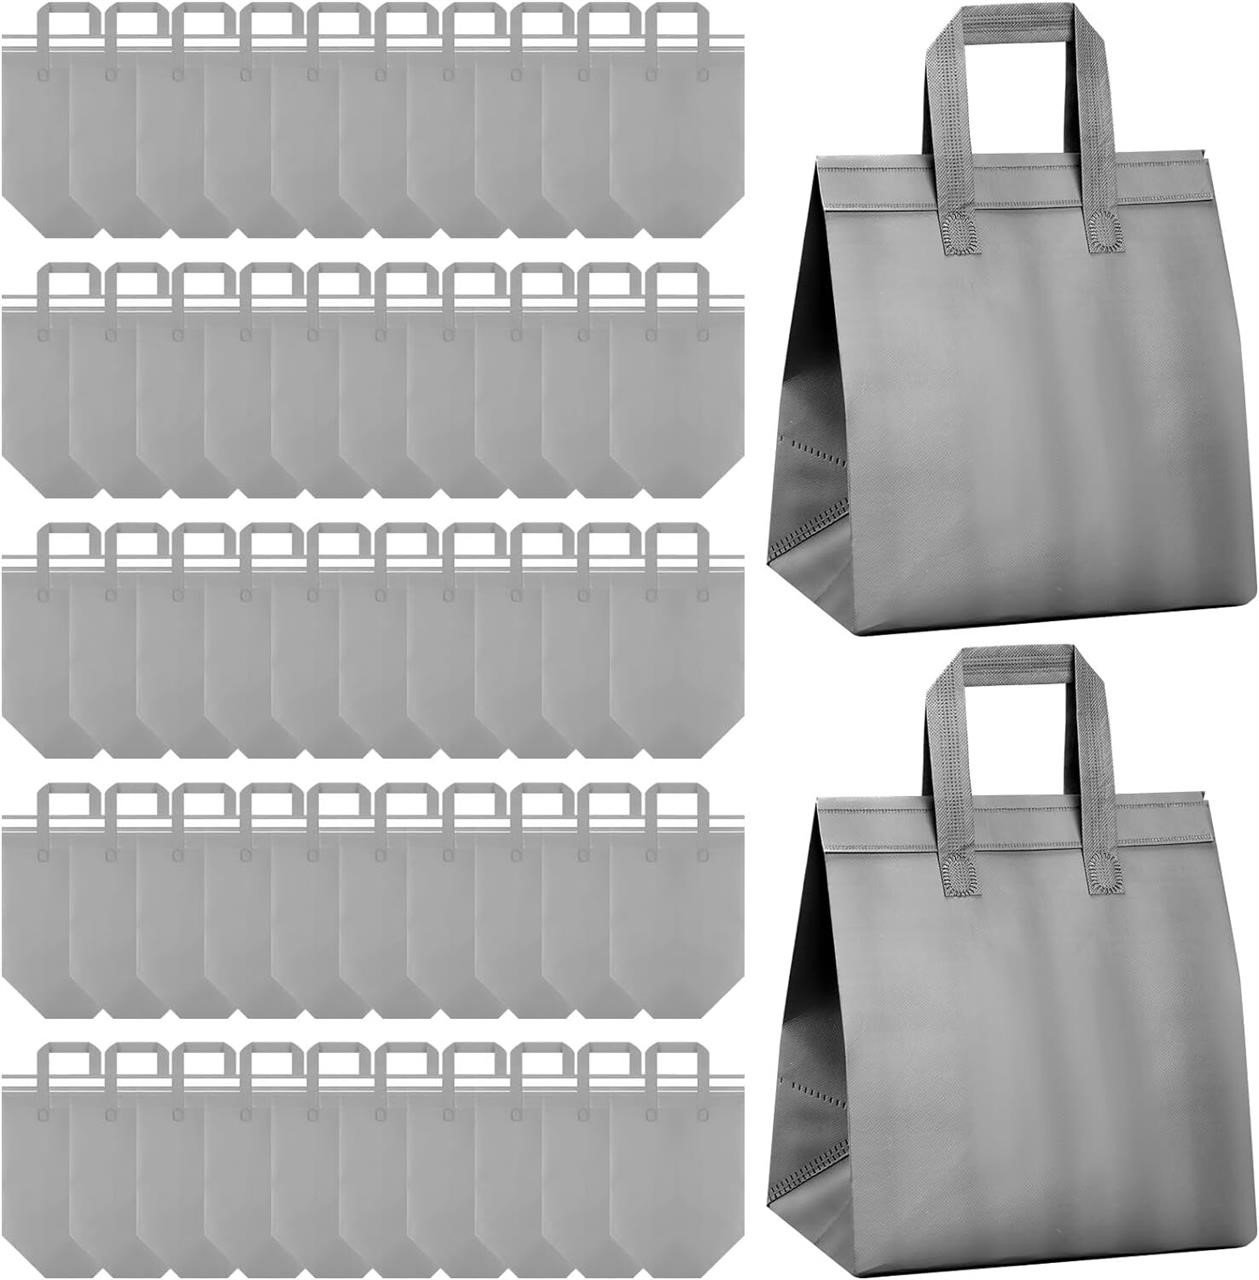 Hushee 200 Pcs Insulated Take out Bags 10x11x6